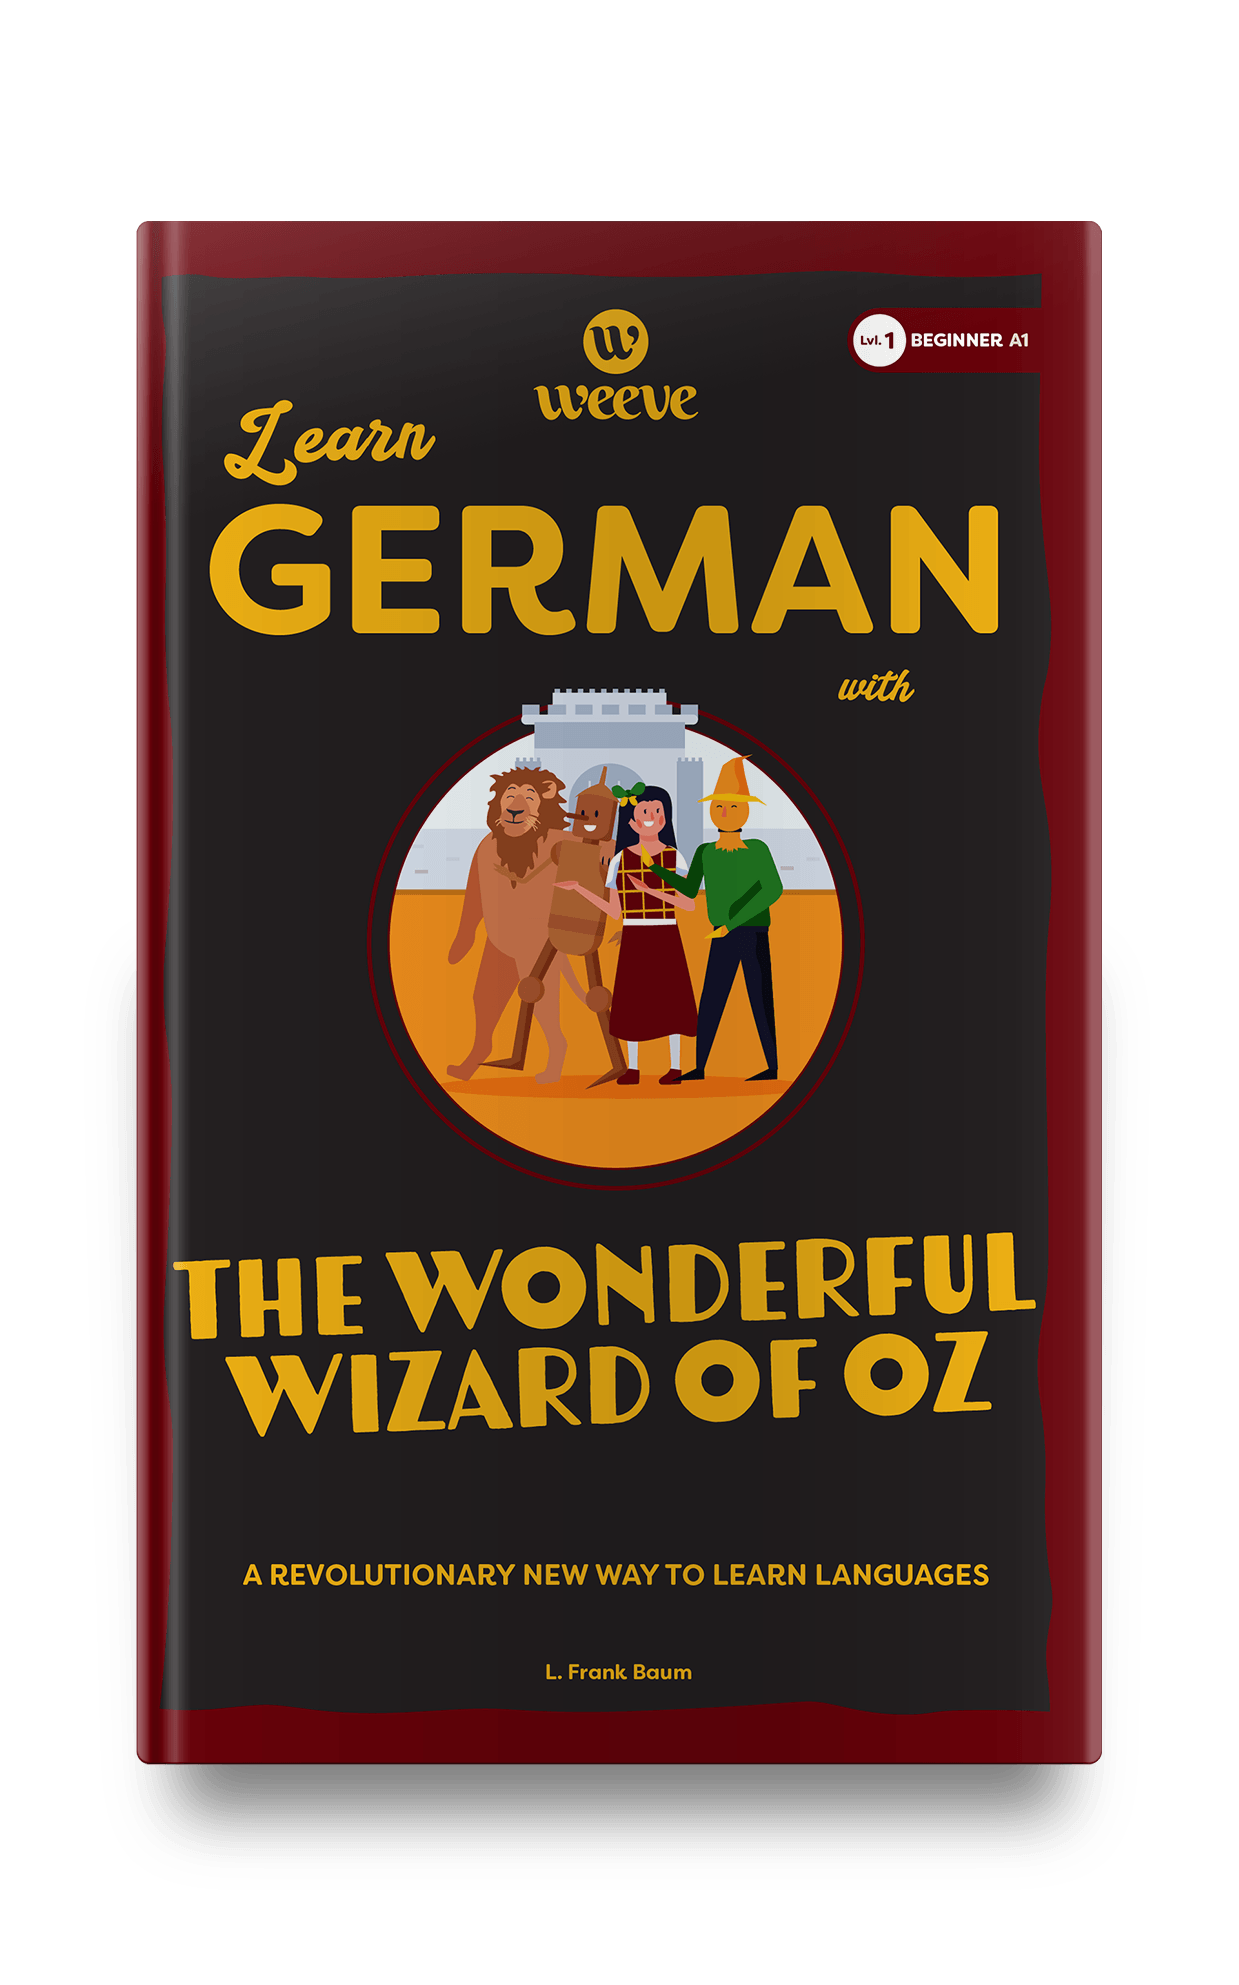 Learn German with the Wonderful Wizard Of Oz - Weeve